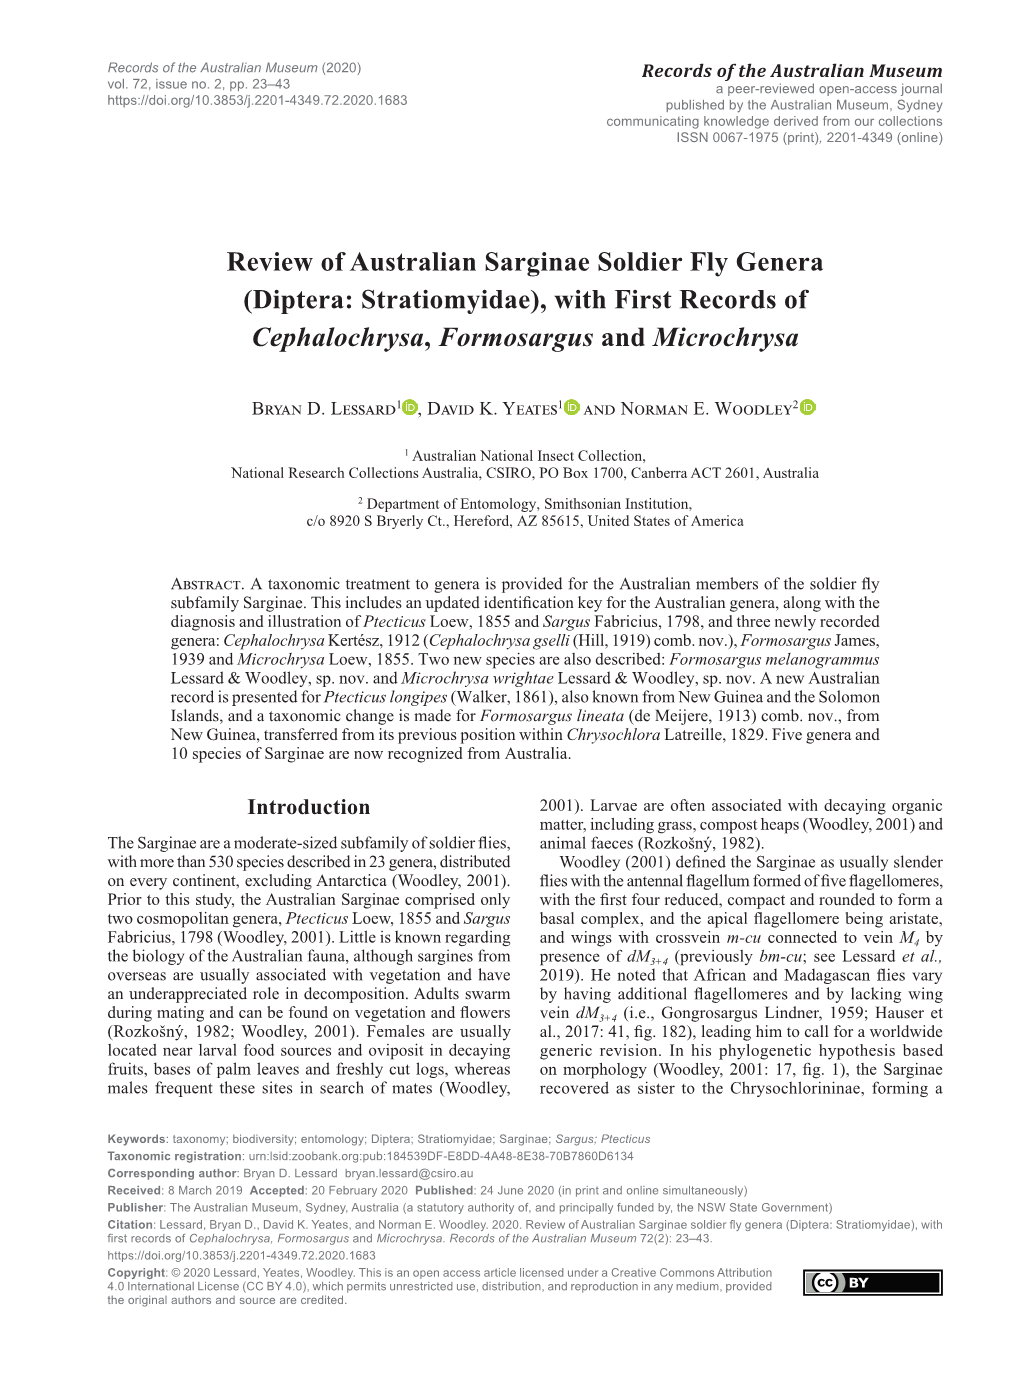 Review of Australian Sarginae Soldier Fly Genera (Diptera: Stratiomyidae), with First Records of Cephalochrysa, Formosargus and Microchrysa